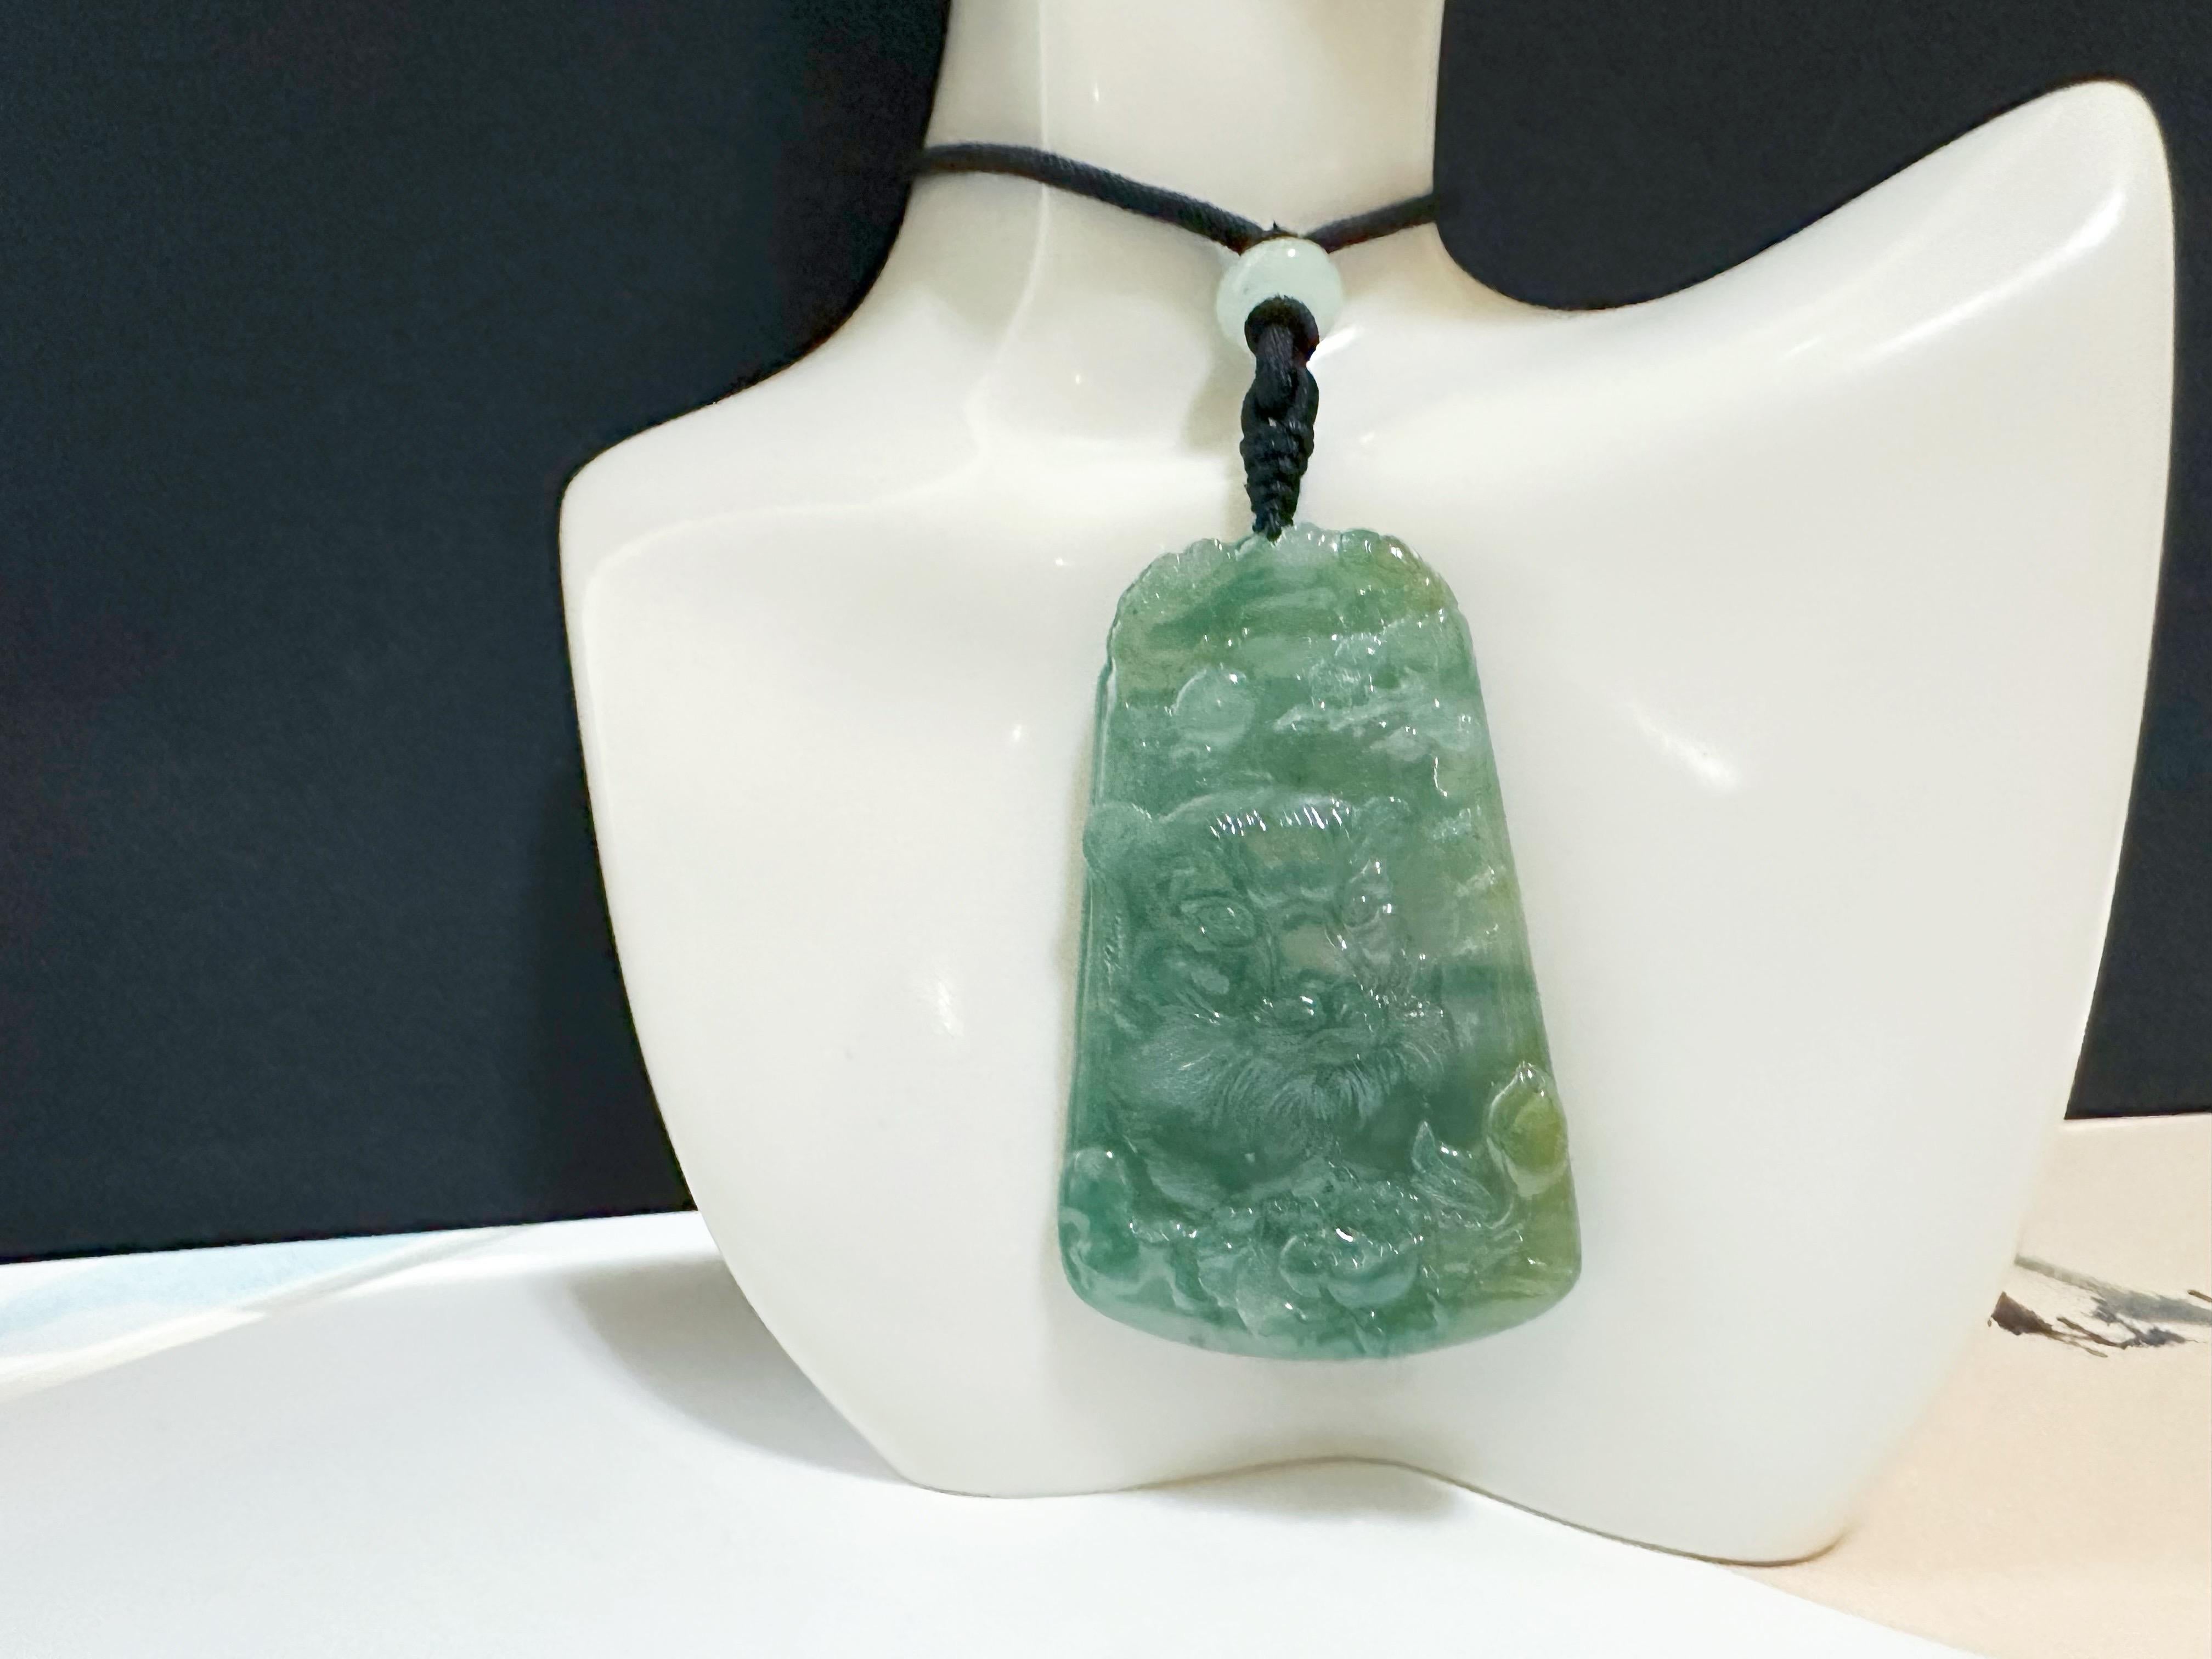 This jade pendant is 100% natural, untreated, and undyed Type-A Myanmar jadeite jade. It is hand-carved into a tiger, flowers, Keishi. The beautiful bluish-green color and icy type texture gifted by Mother Nature make this pendant simply unique and